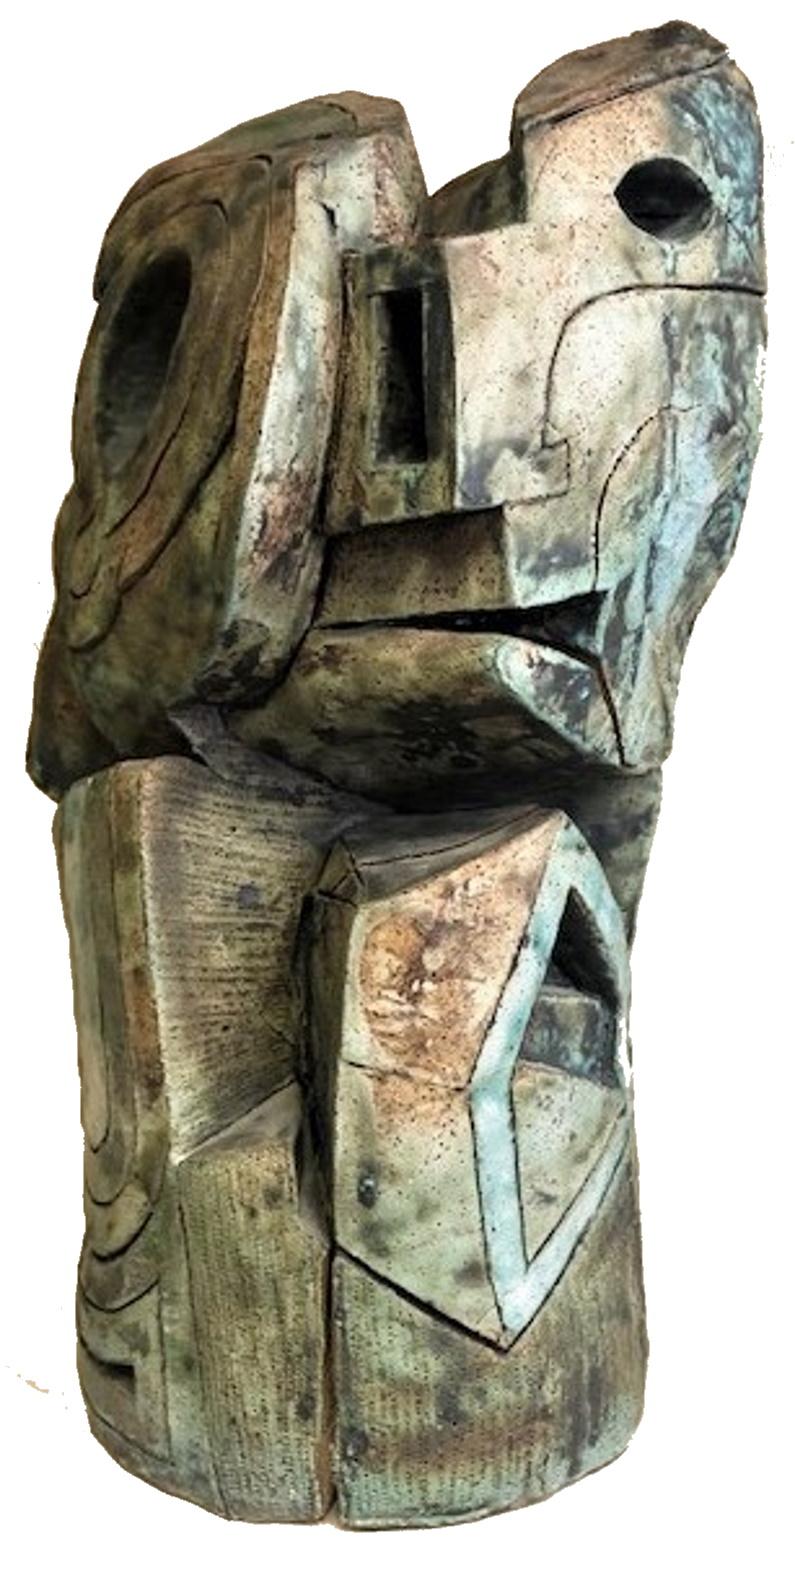 Clay Doug Rochelle, 3 Faces, American Abstract Expressionist Ceramic Sculpture, XX C 